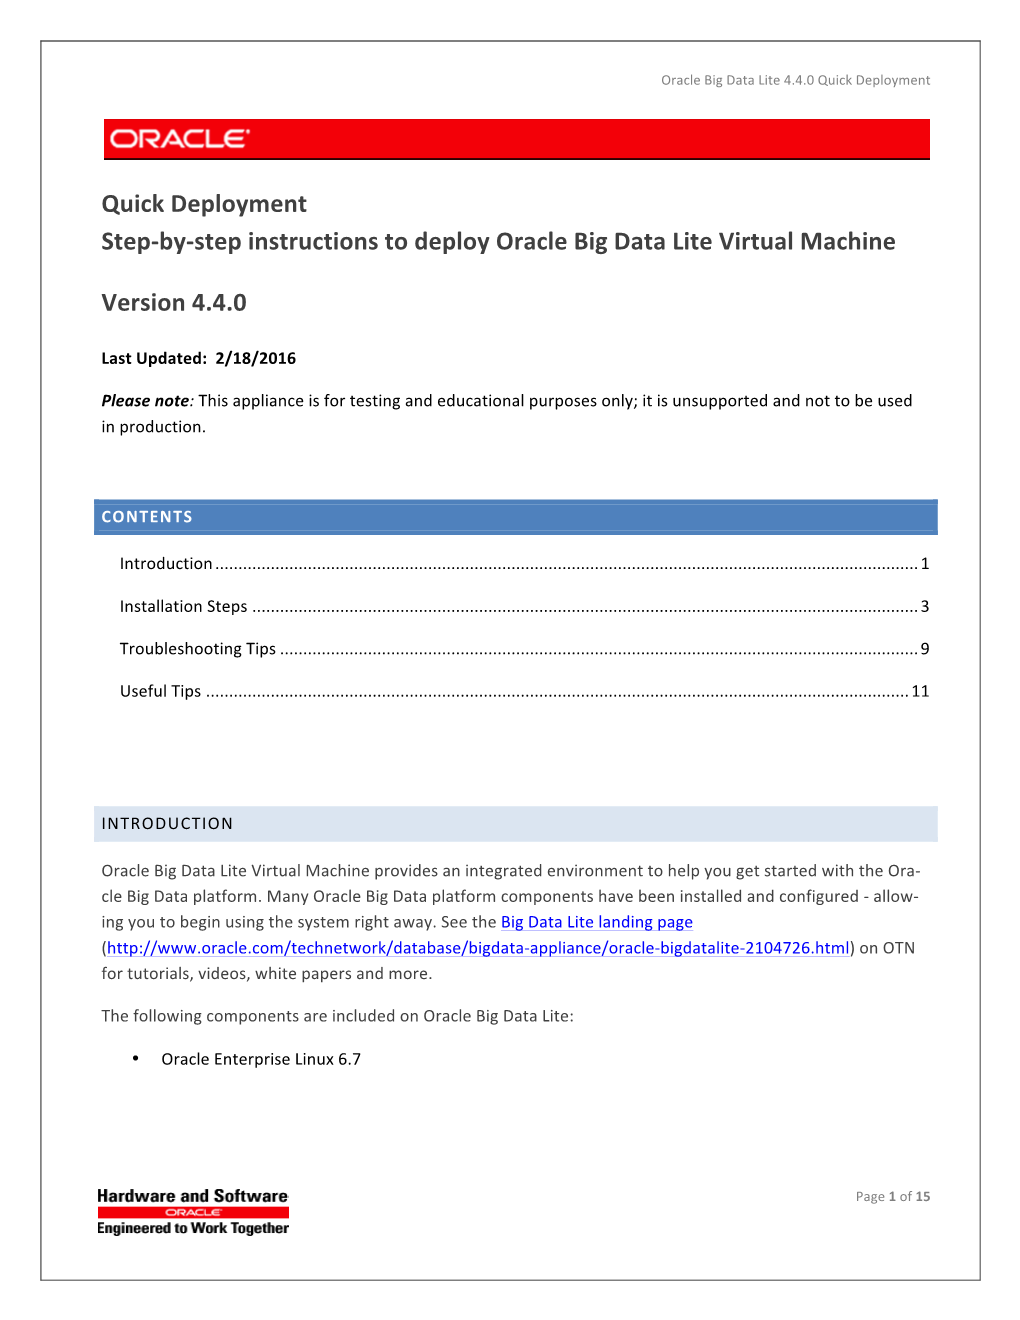 By-‐Step Instructions to Deploy Oracle Big Data Lite